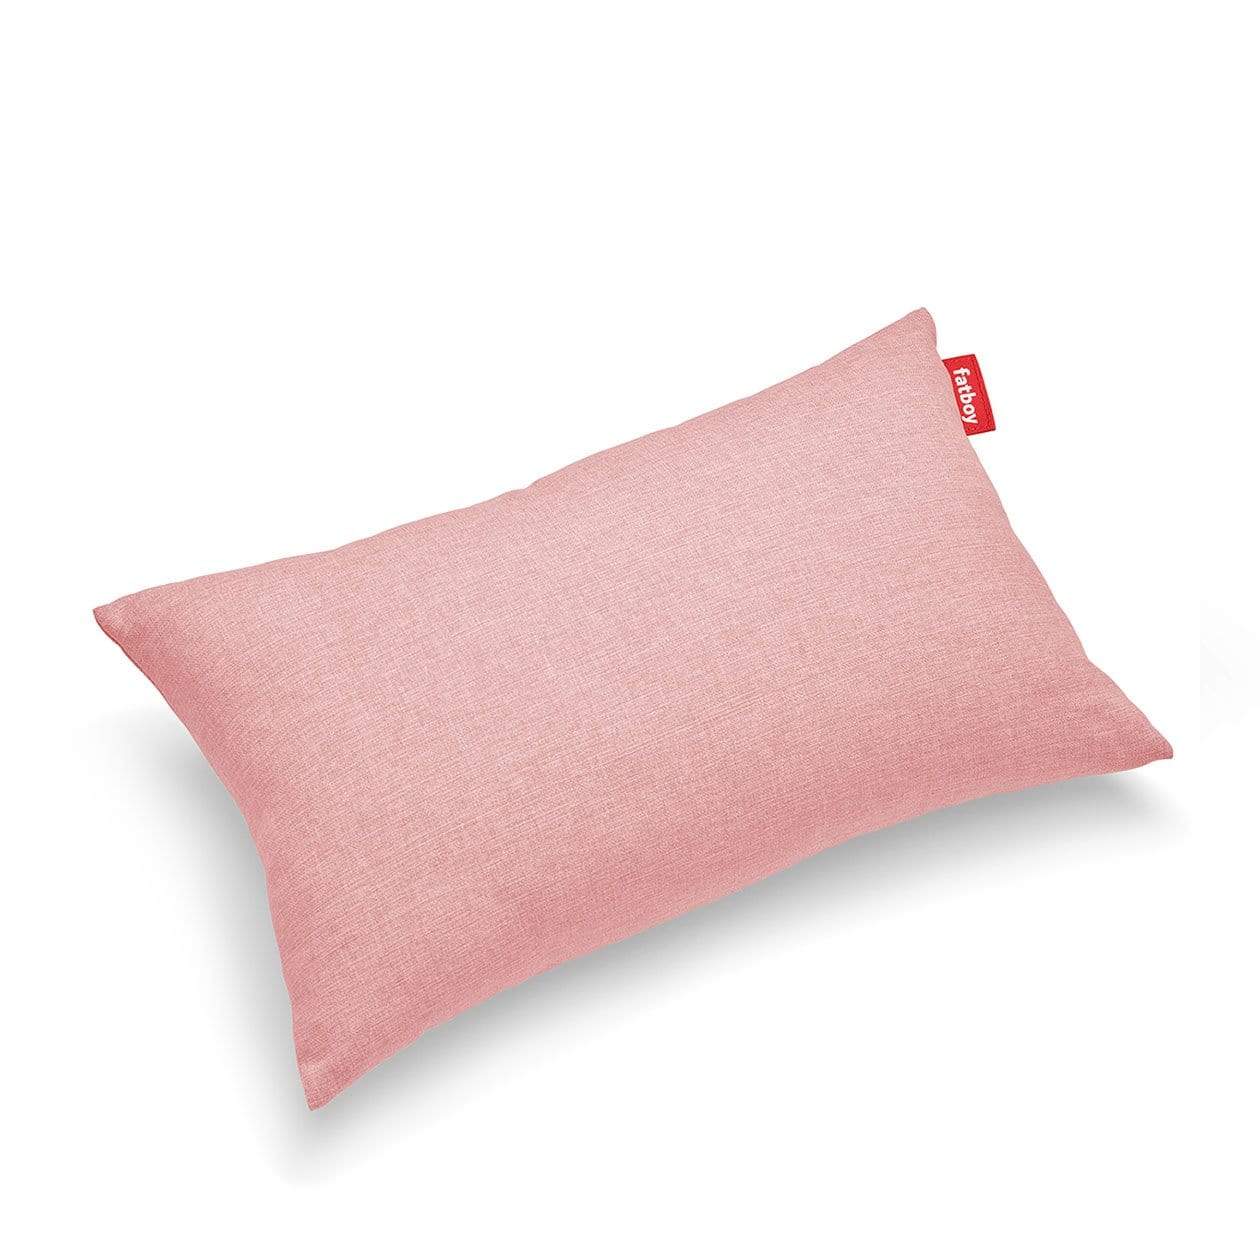 King Pillow blossom  -  Throw Pillows  by  Fatboy